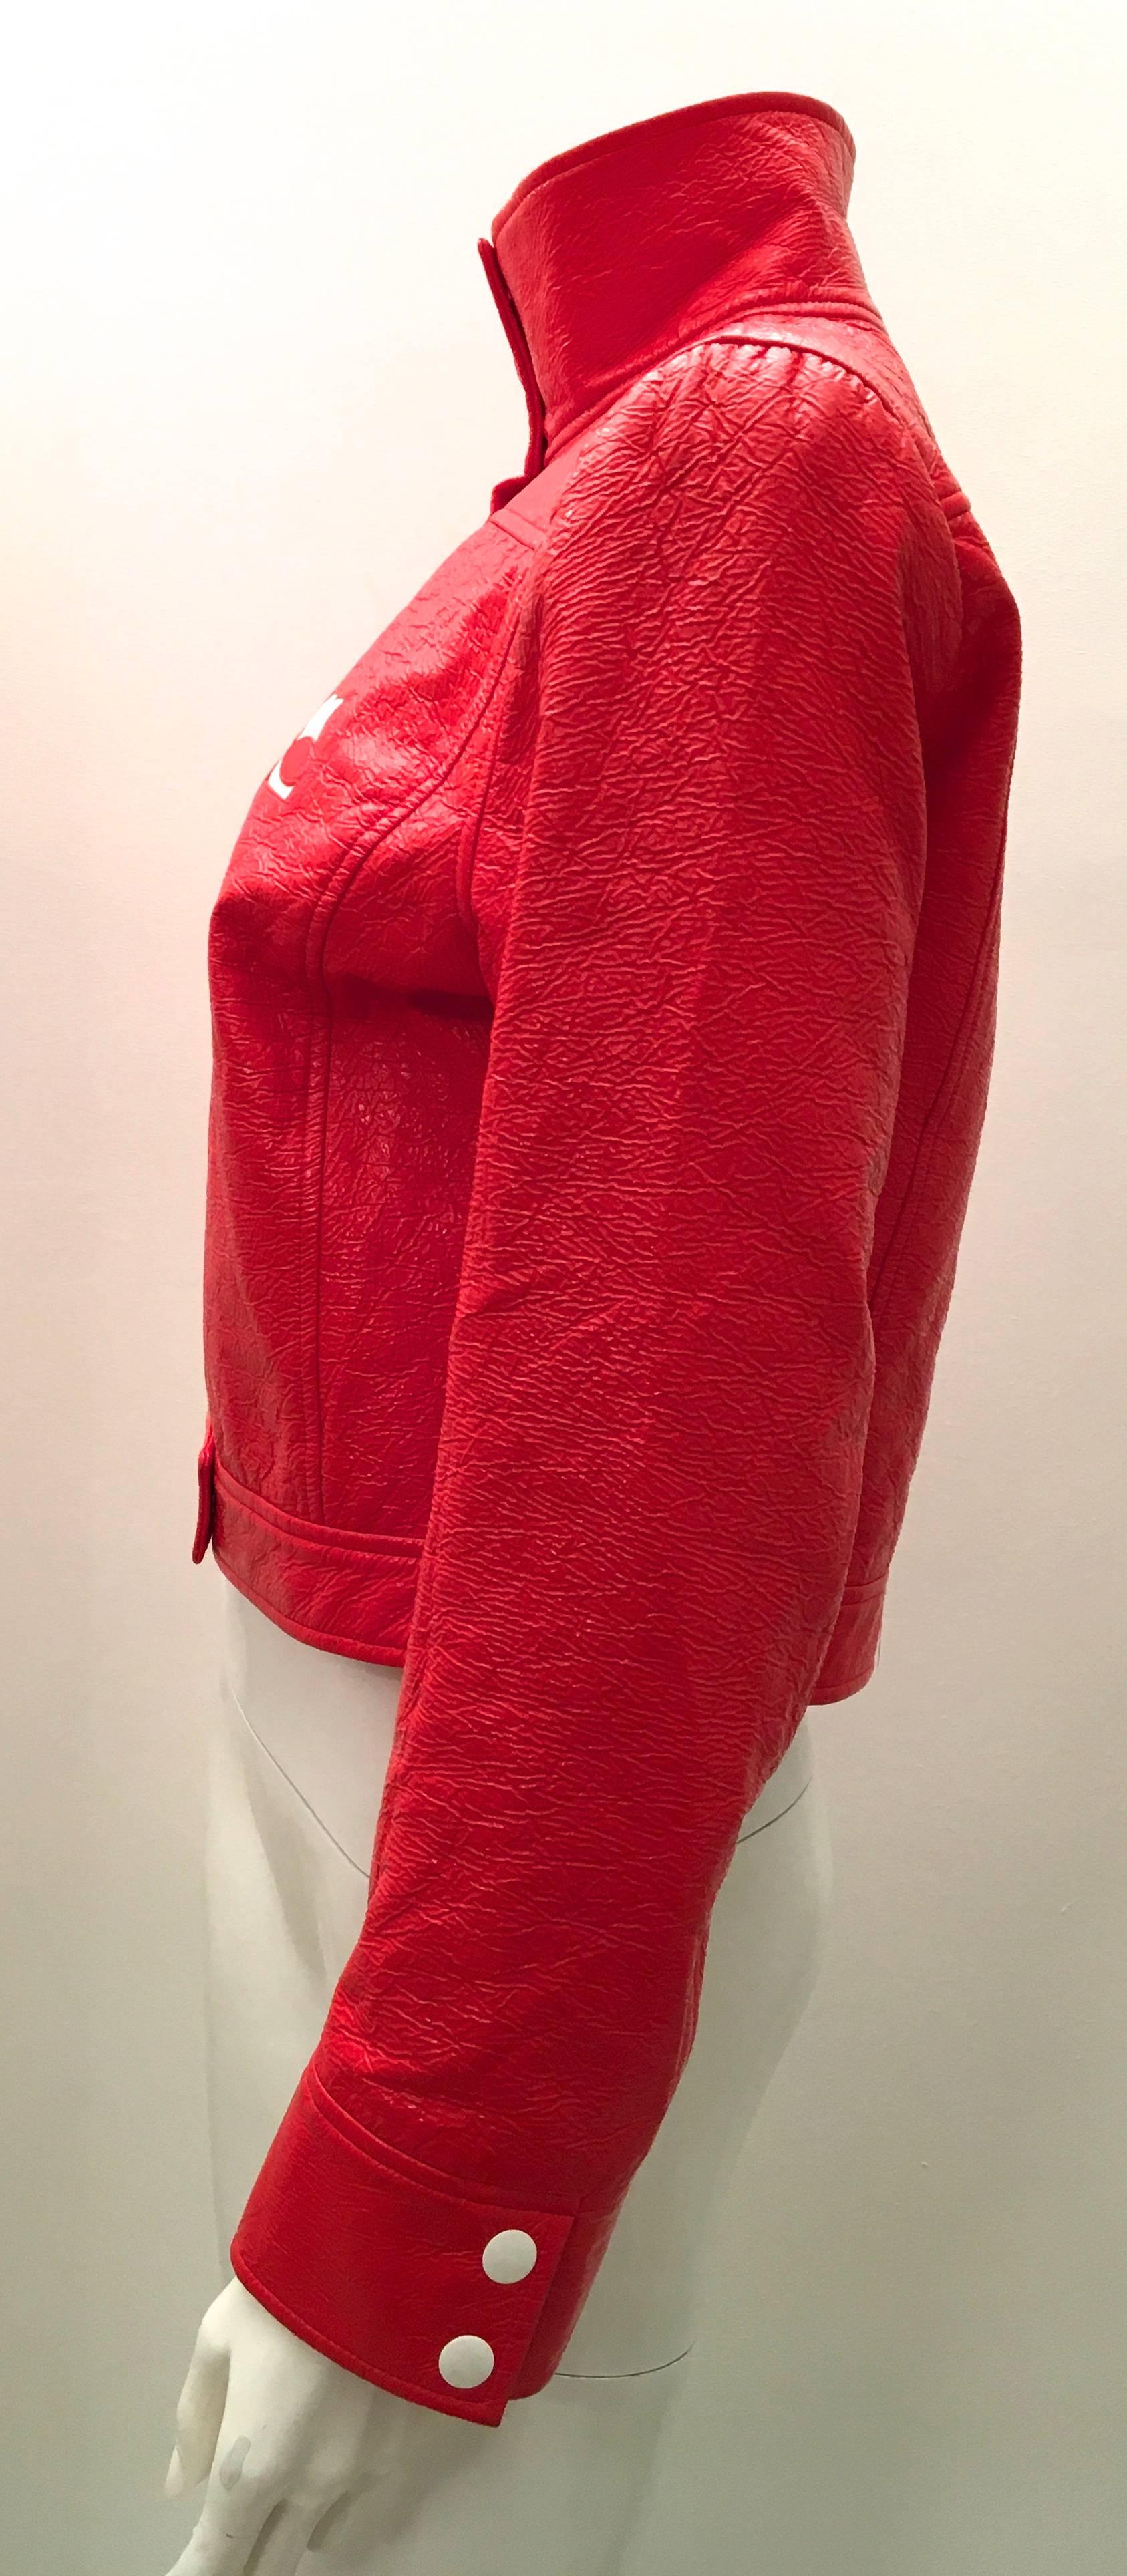 New Courreges Jacket - Orange / Red Patent Leather  For Sale 1